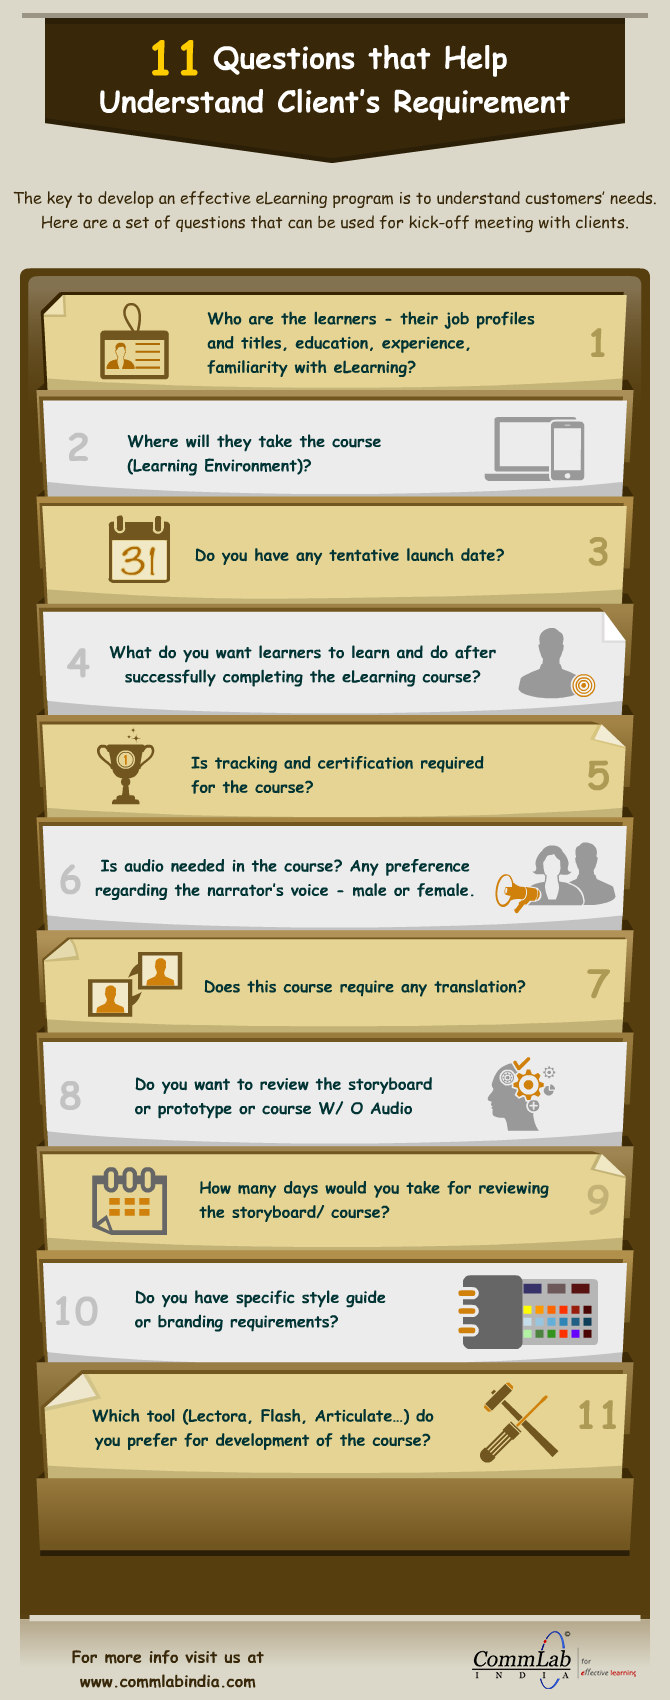 11 Questions that Help Understand Client’s Requirement [Infographic]